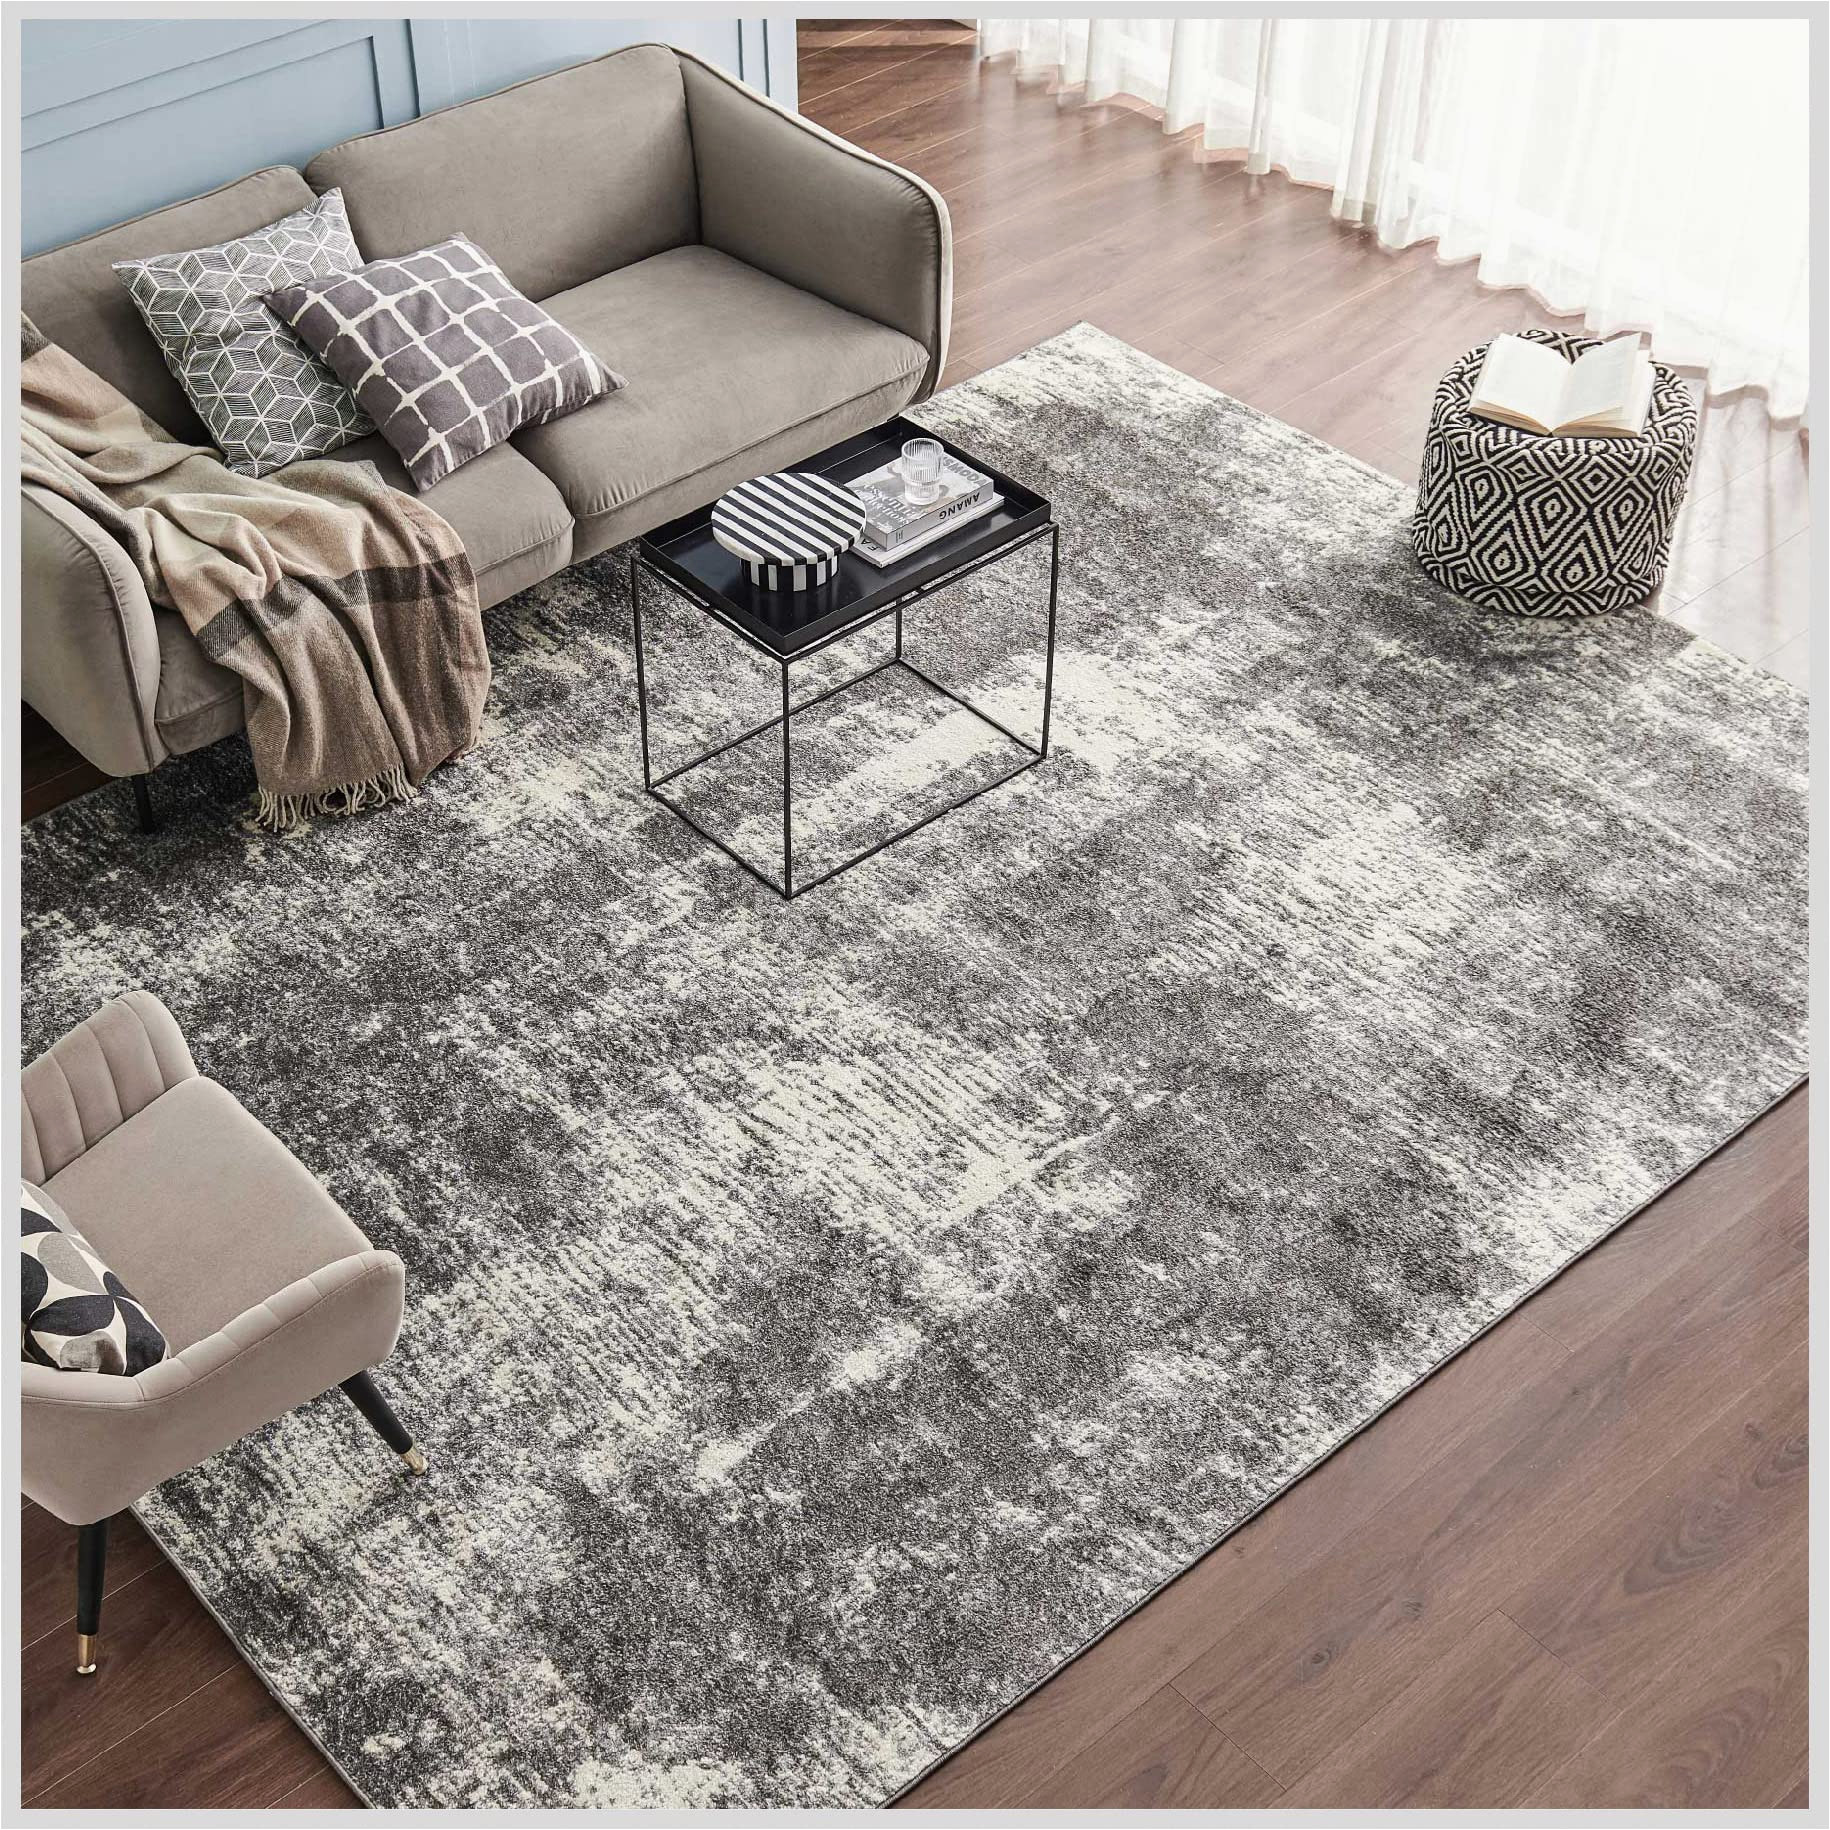 Living Spaces area Rugs 8×10 Eviva 8×10 area Rugs for Living Room Polypropylene Turkish Rug Indoor Low Pile Large 8 X 10′ area Rug with Stain-resistant Big Size Grey 8 by 10 area …